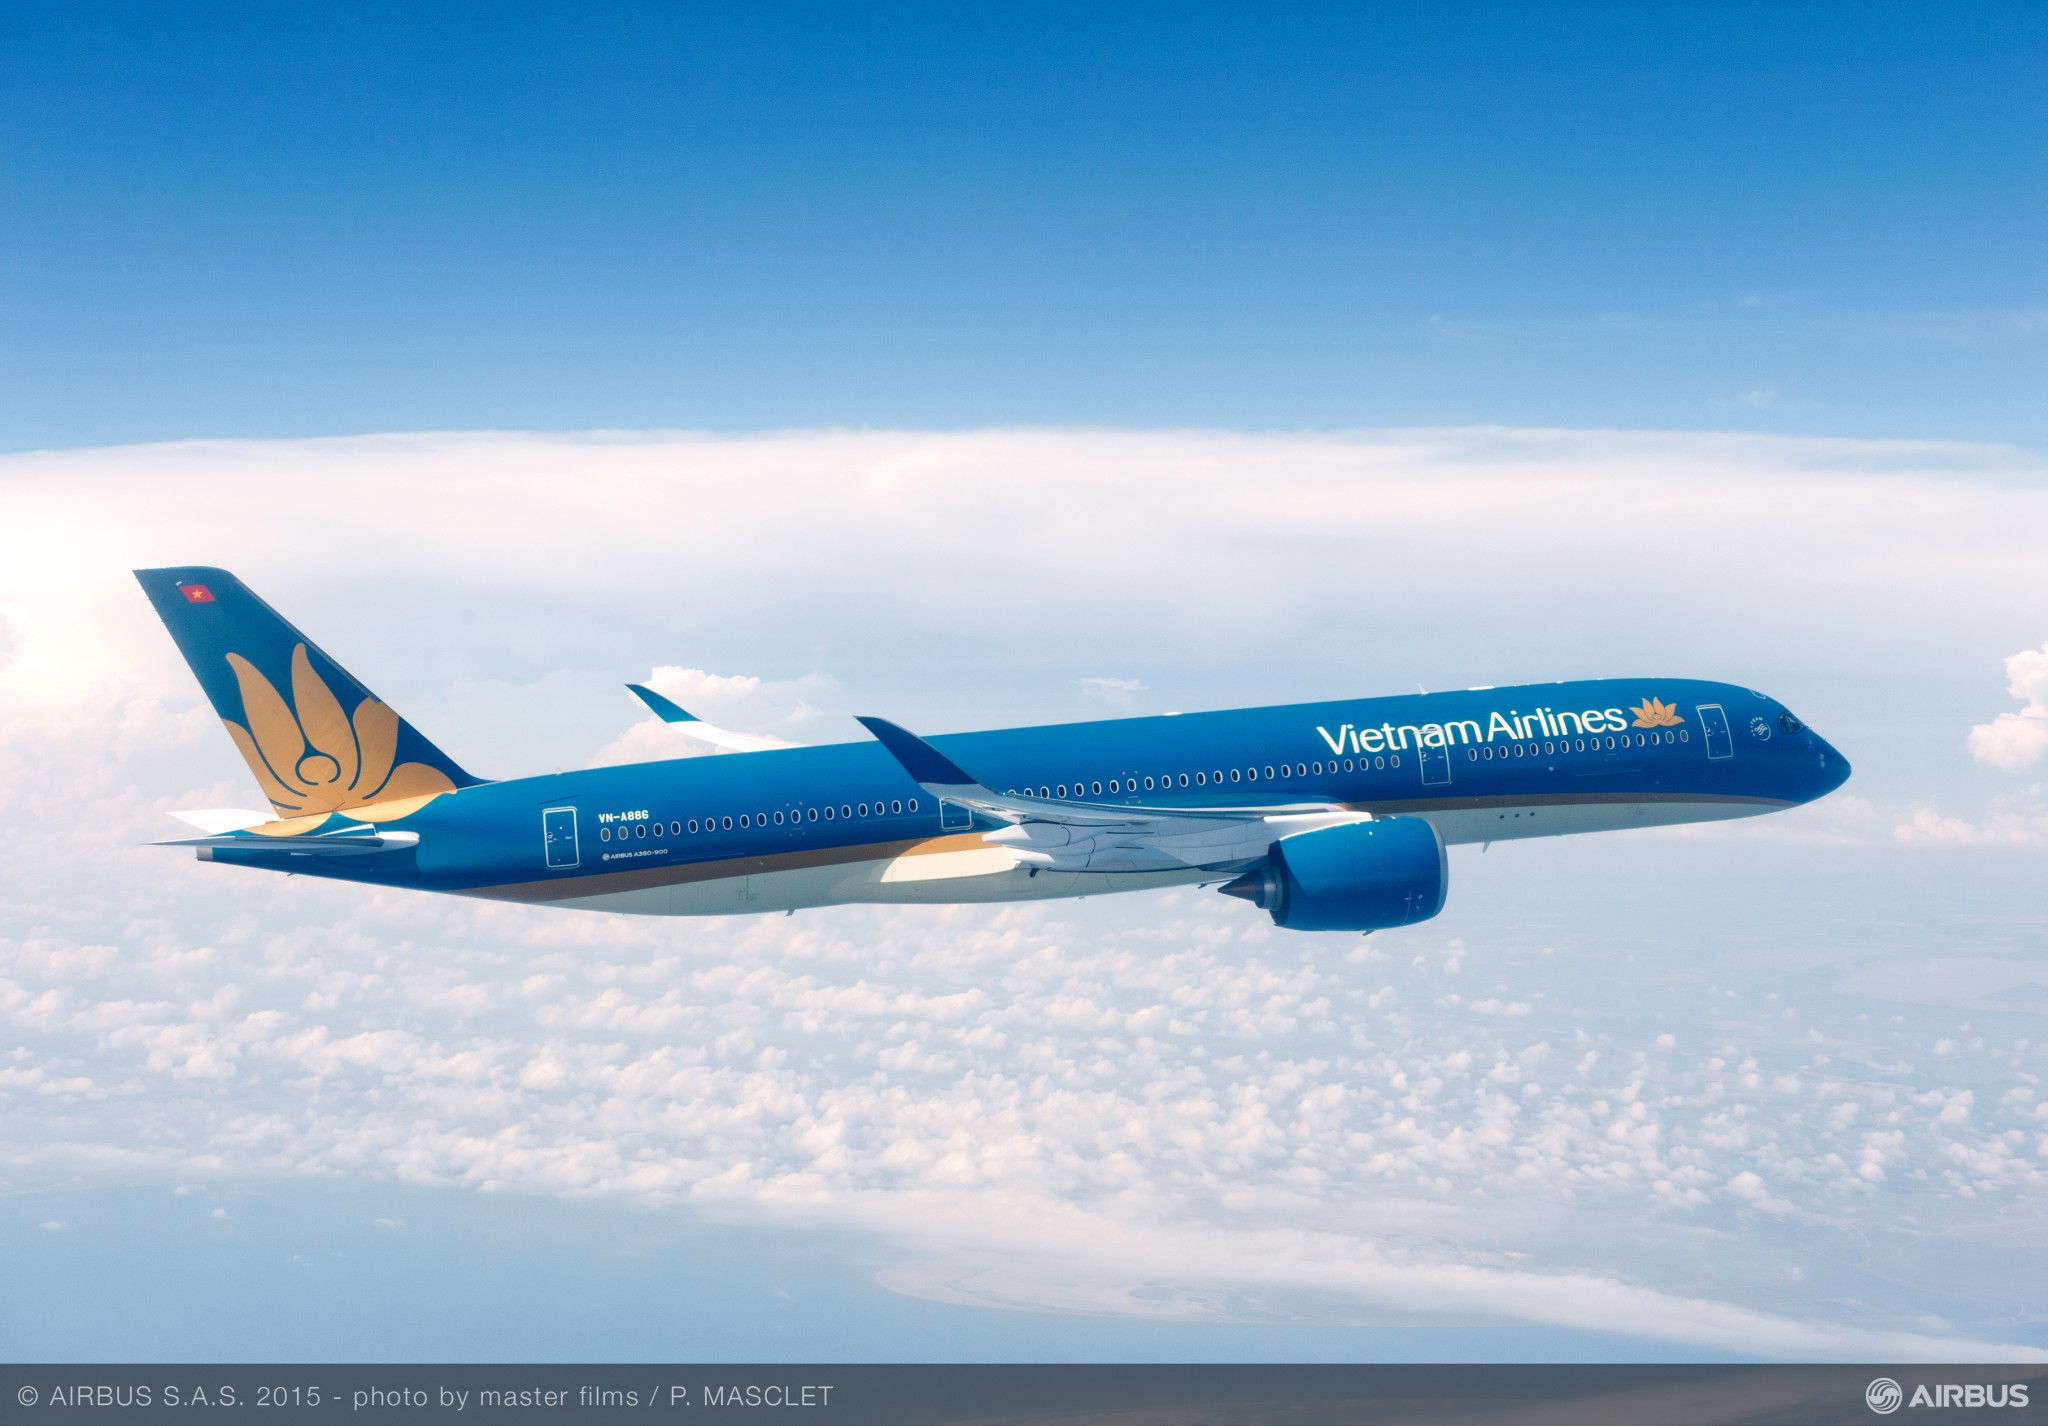 State Securities Commission asks Vietnam Airlines to disclose its financial report